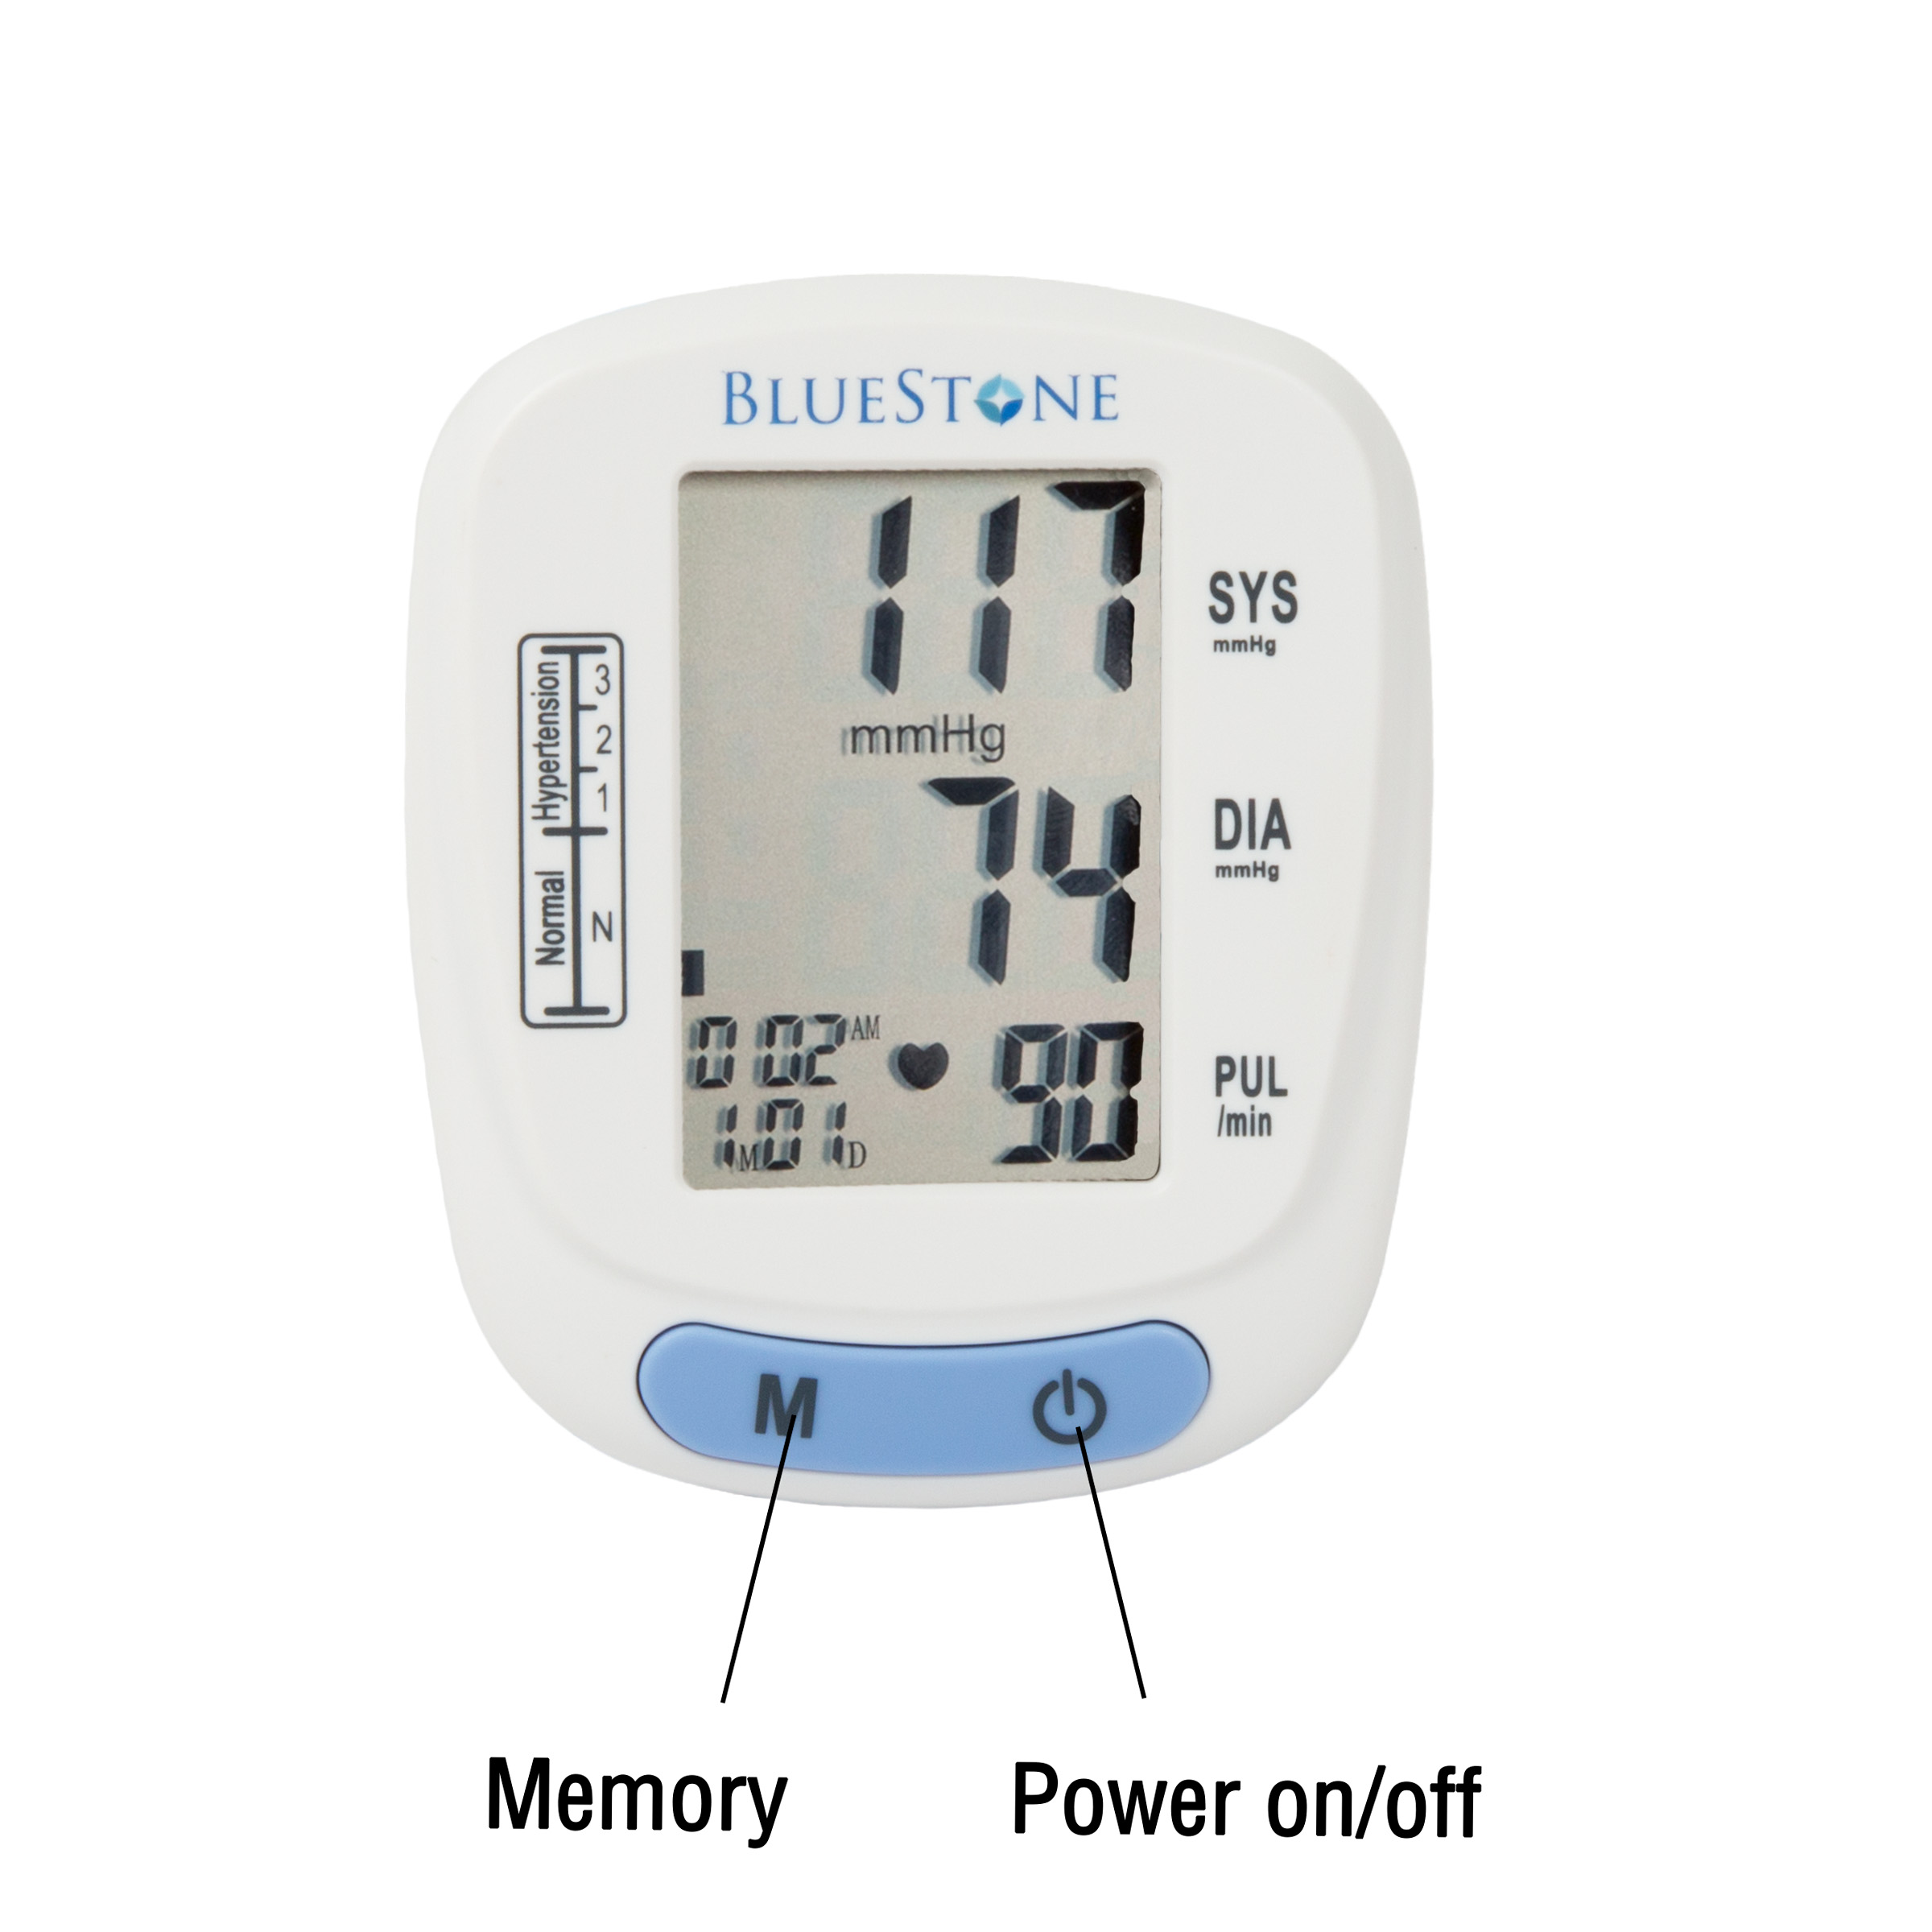 Blood Pressure Monitor With Heart Rate - Automatic Wrist Cuff Blood Pressure Machine With LCD Display Memory and Carrying Case by Bluestone - image 4 of 7